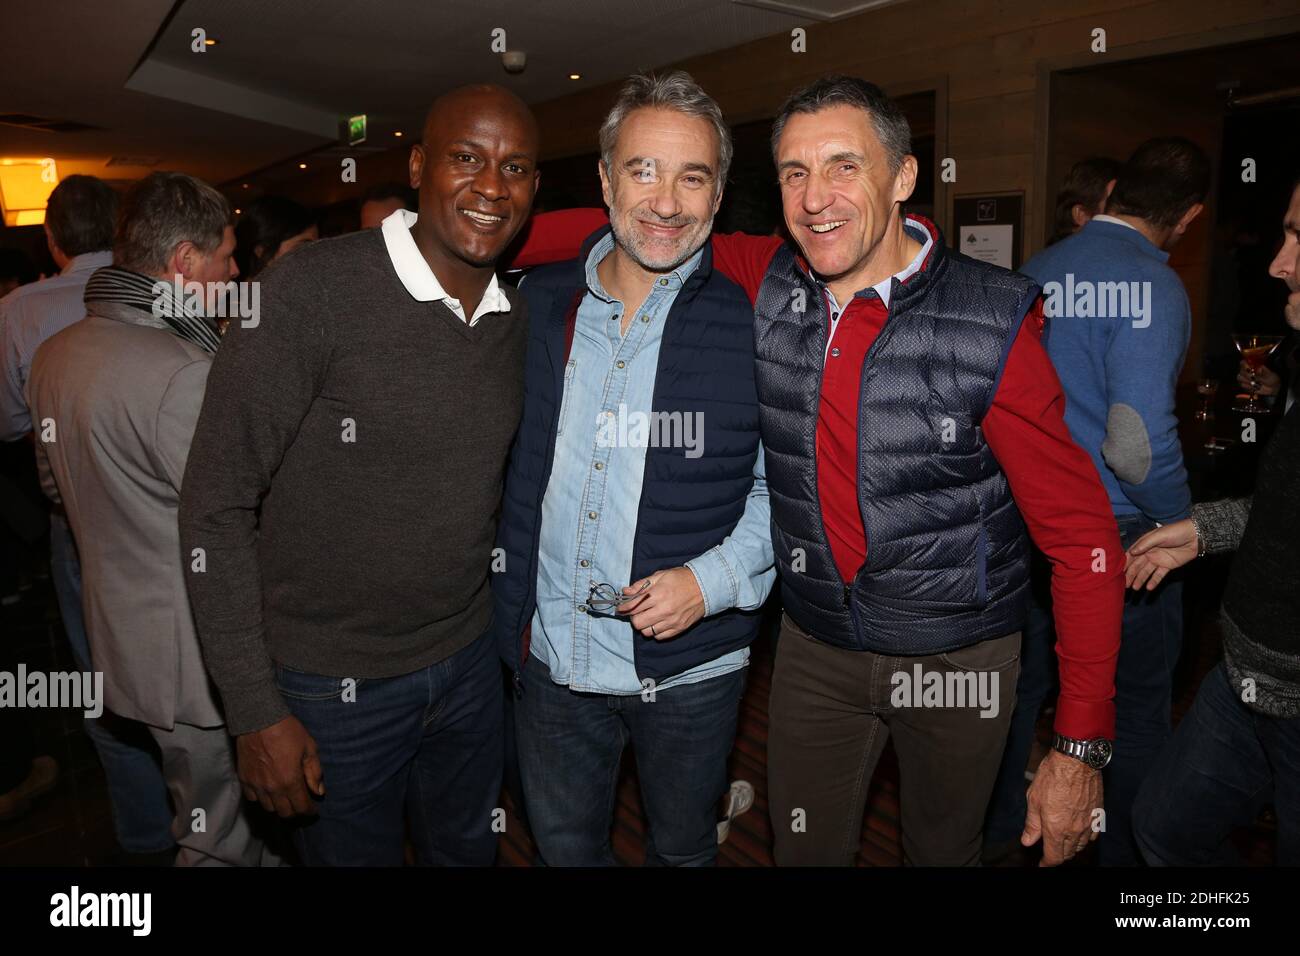 EXCLUSIVE - Olivier Girault, Christophe Cessieux and Thierry Bourguignon  attending the 10th RMC Sport Games Party in Val d'Isere, France, on  December 10, 2017. Photo by Jerome Domine/ABACAPRESS.COM Stock Photo - Alamy